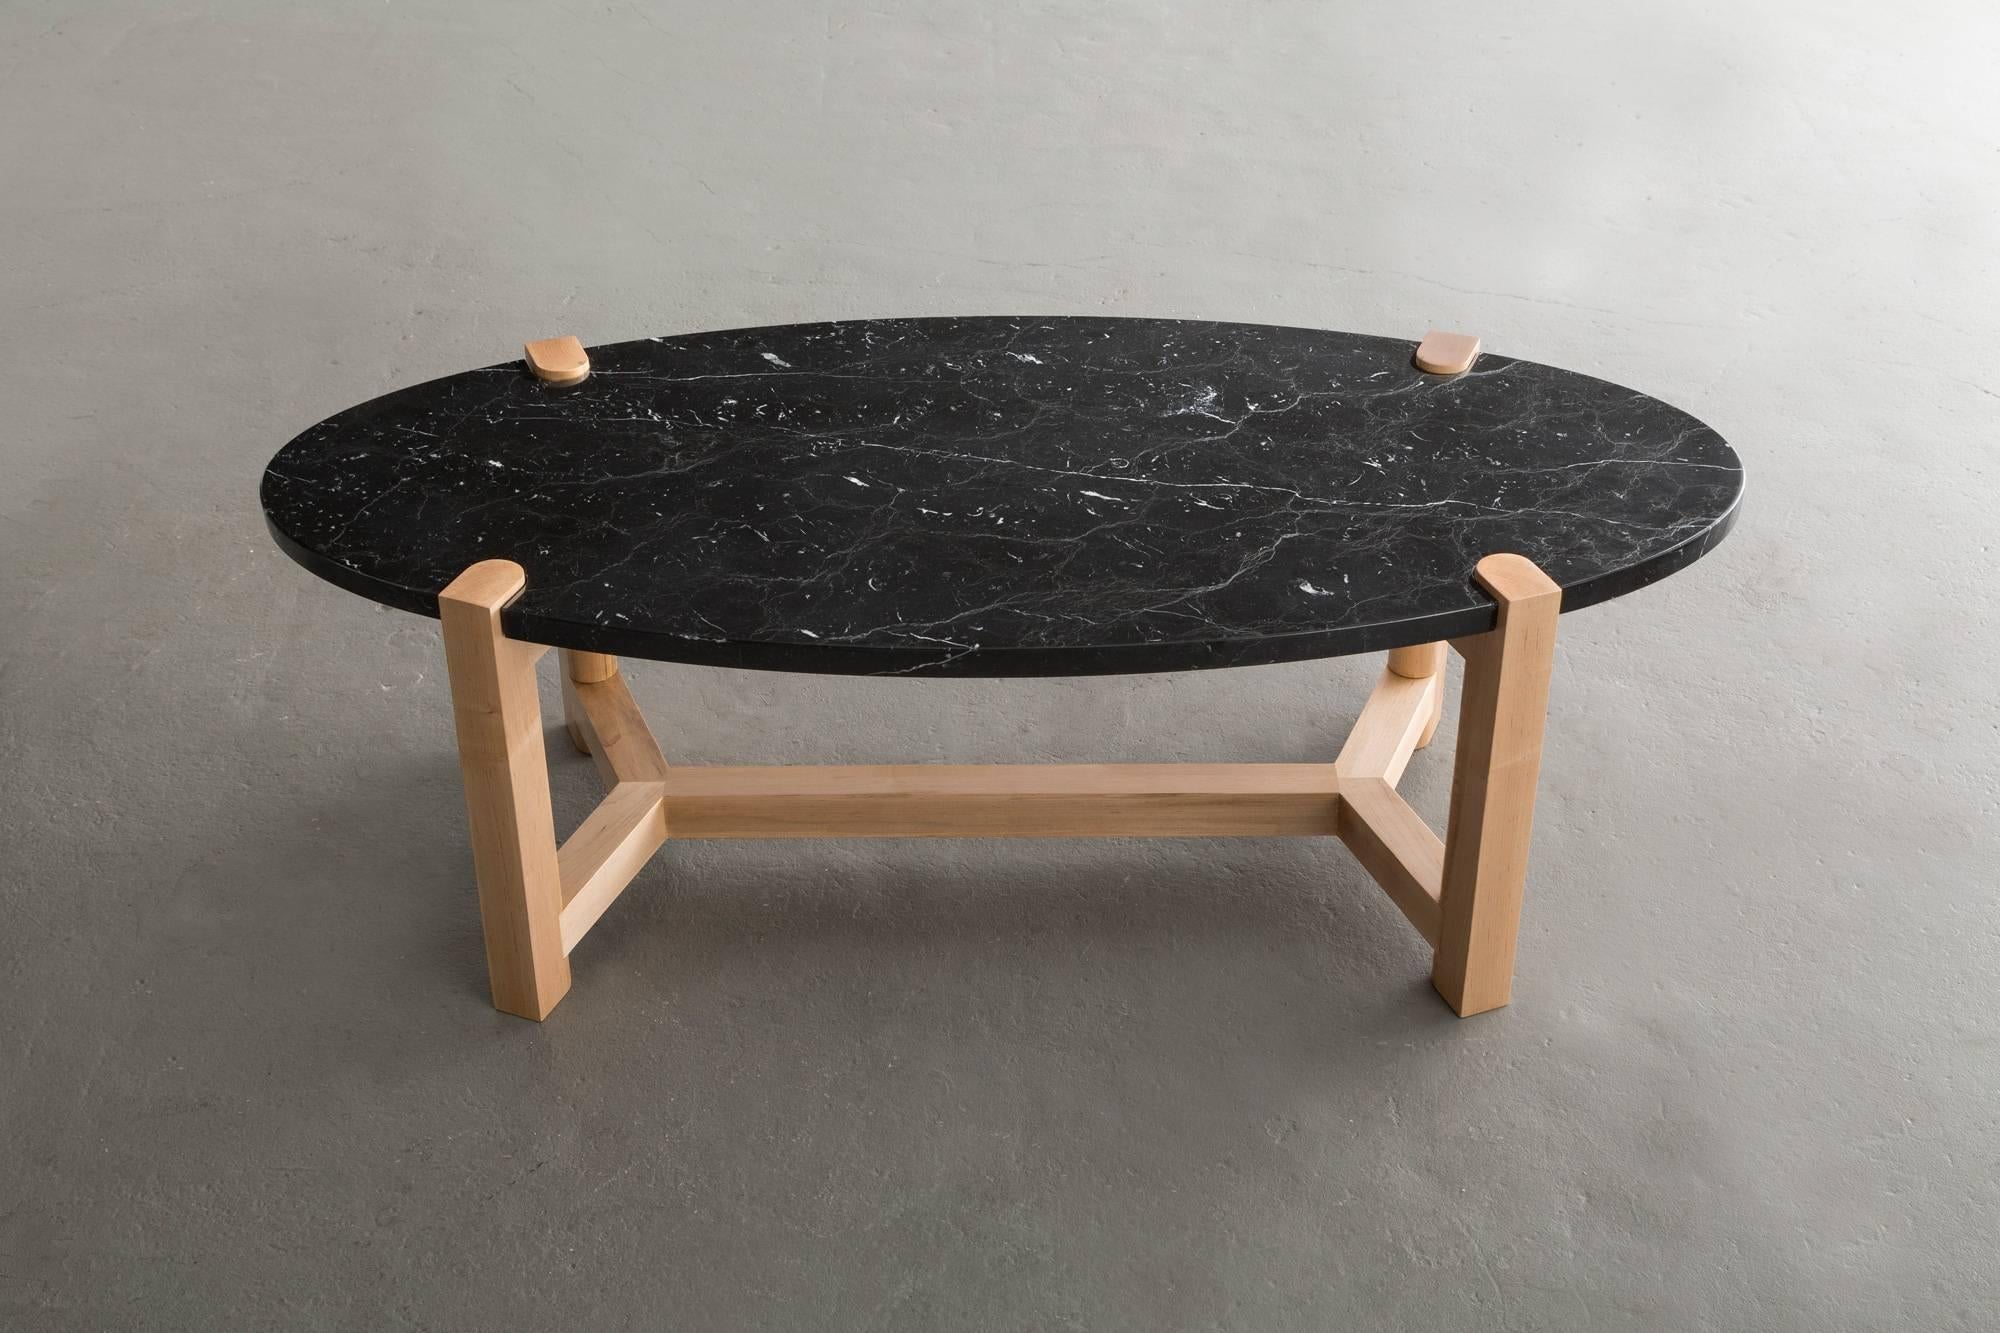 Here the details and connections become the focus at the intersection of surface and structure.

Solid wood frame shown in maple. Also available in ash, cherry, and walnut. 
Stone top shown in Nero Marquina marble and available in locally sourced,